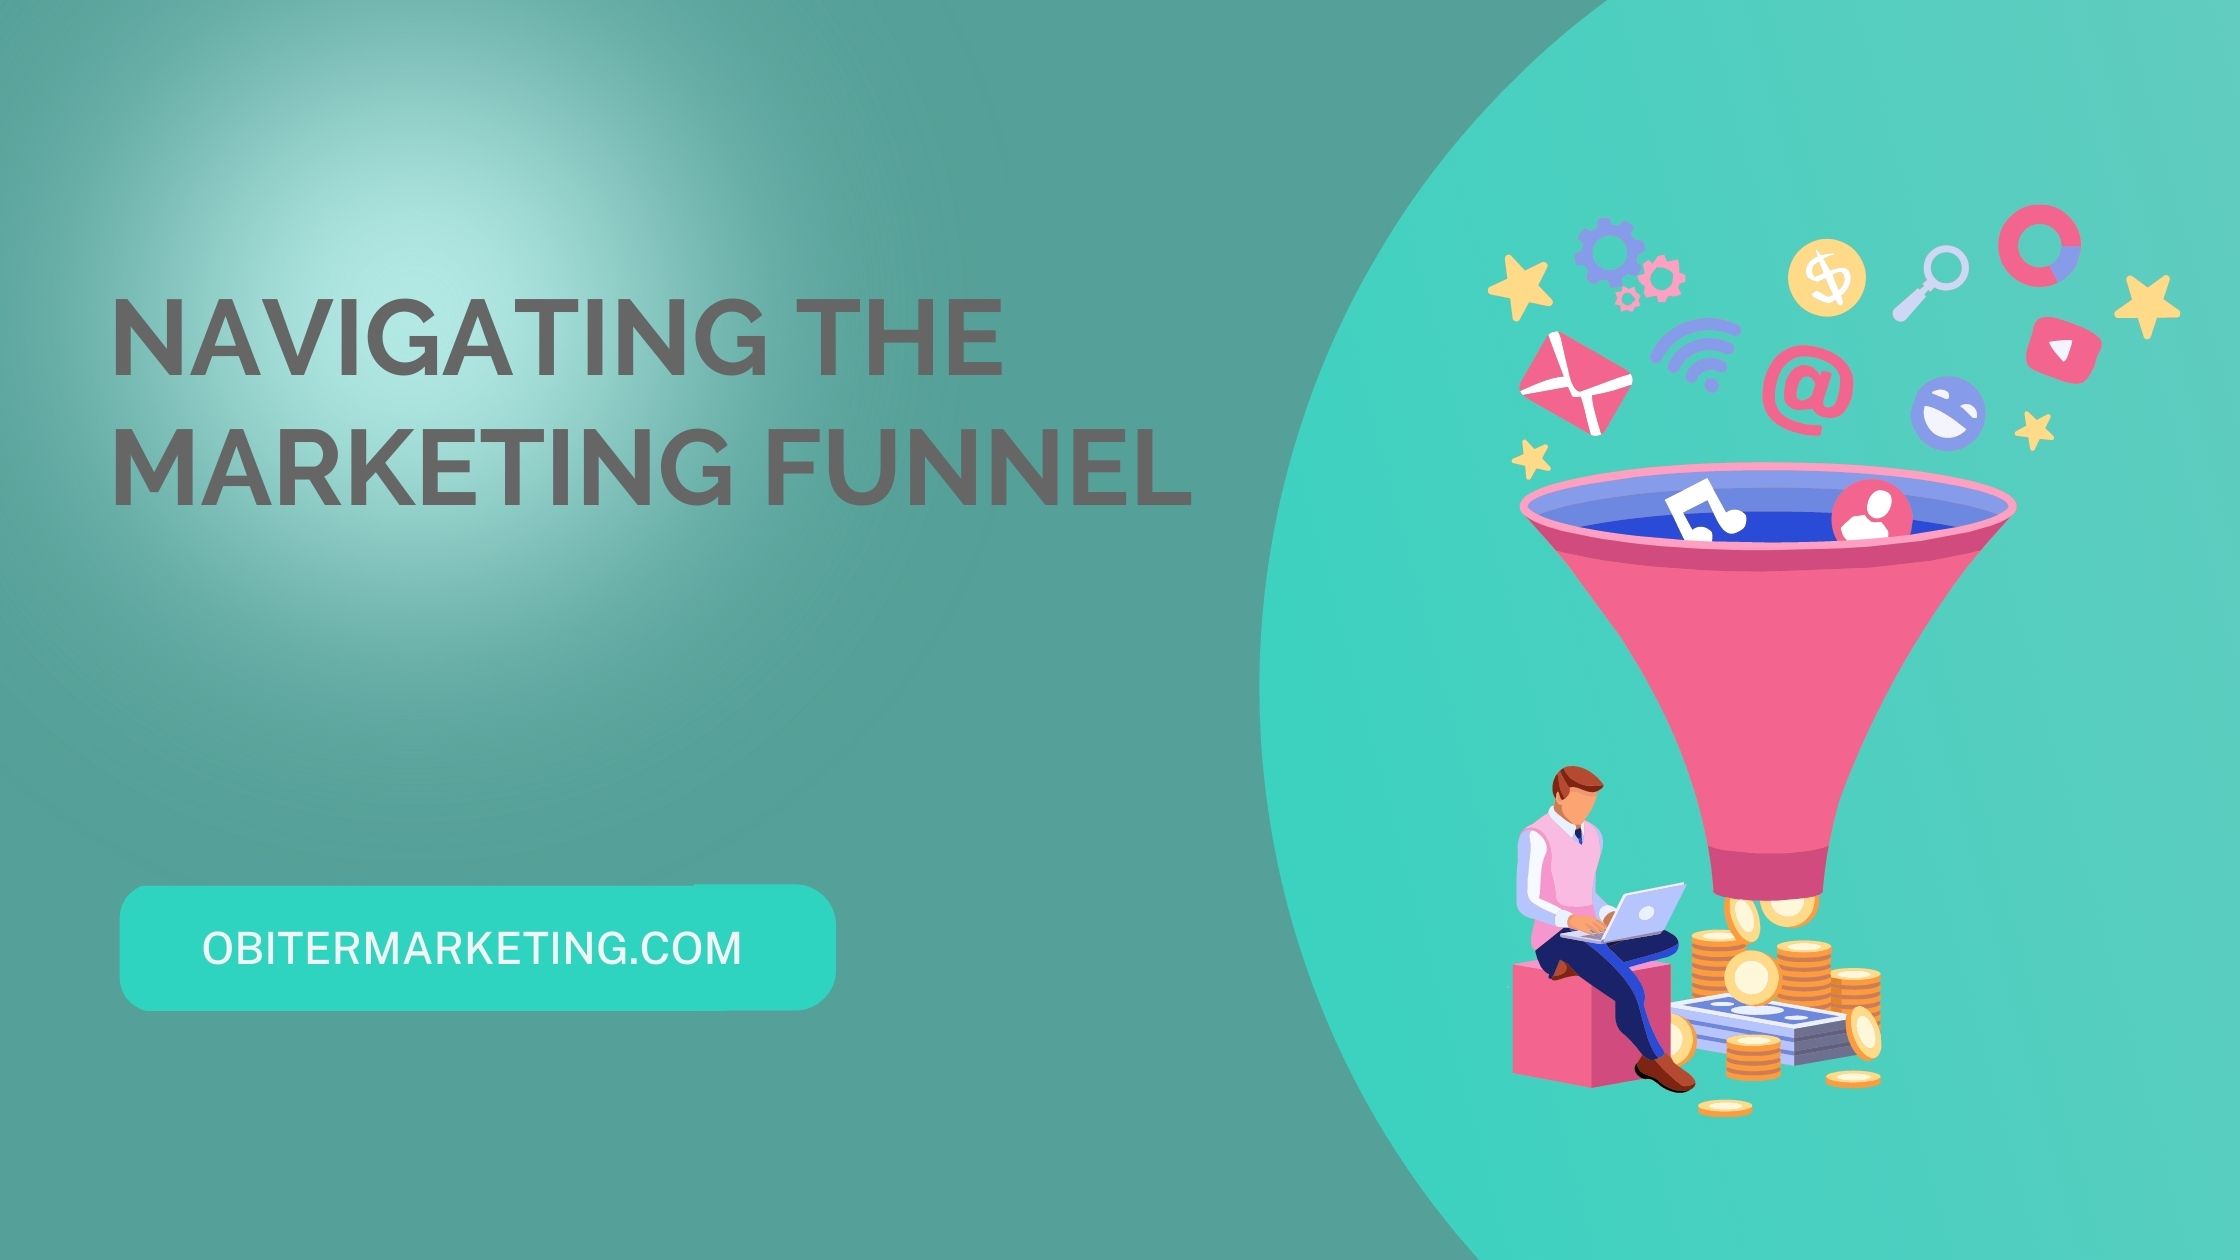 Blog Banner with an illustration of a person sitting at the bottom of law firm marketing funnel, alongside the blog title: Navigating the Marketing Funnel